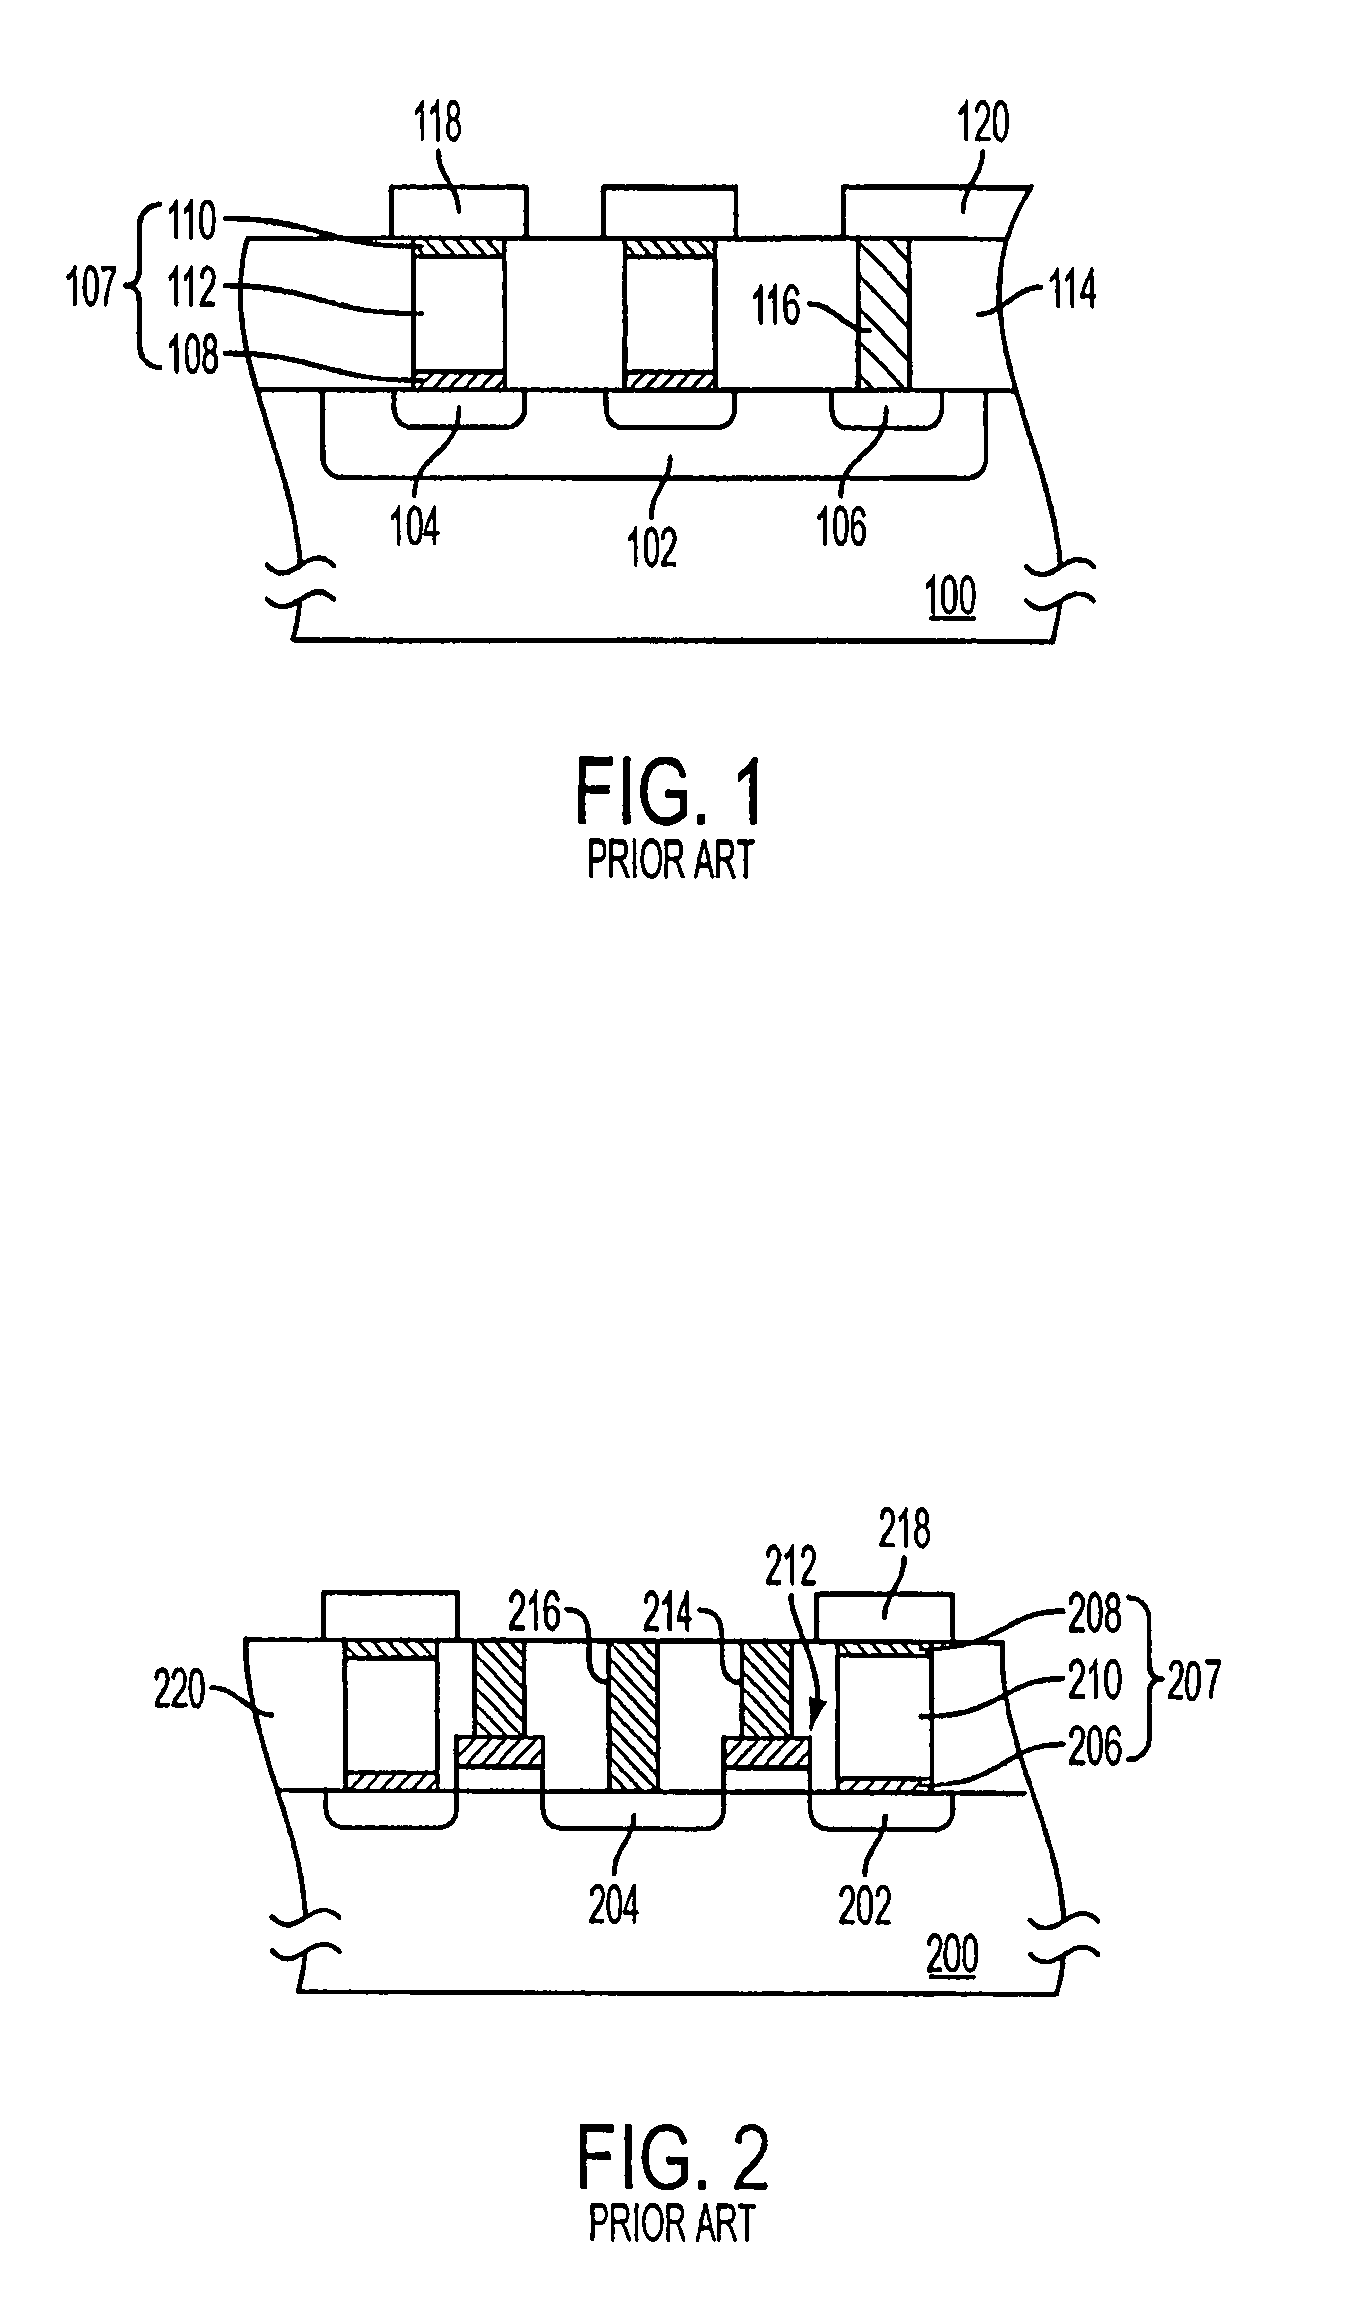 Reproducible resistance variable insulating memory devices having a shaped bottom electrode